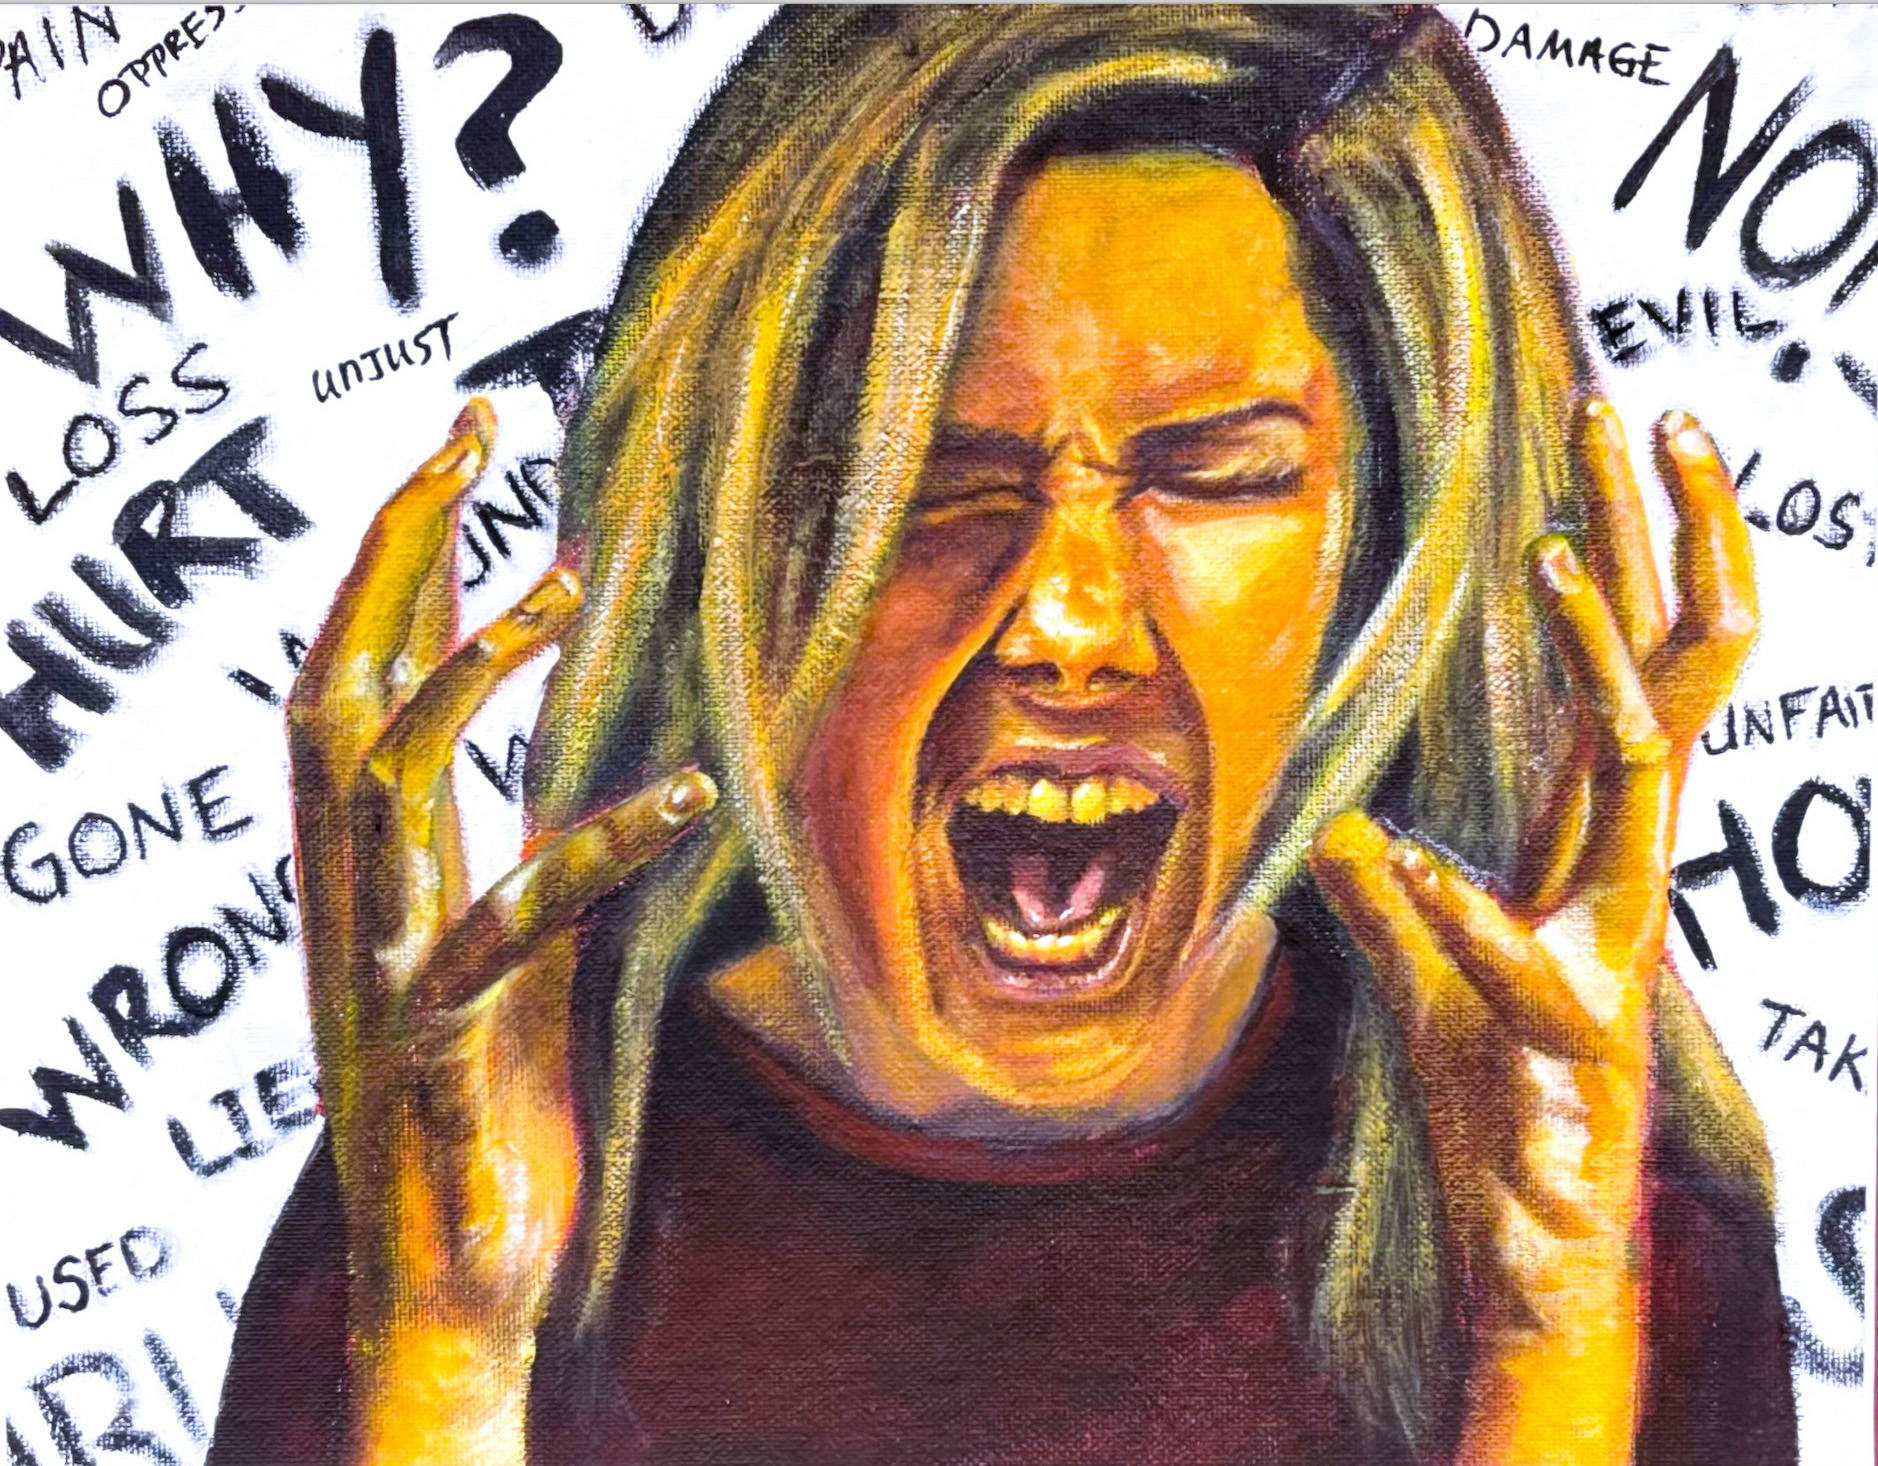 Why? / Acrylic painting by Judy Waters called "Why?" made to represent the 2nd stage of the grief cycle.